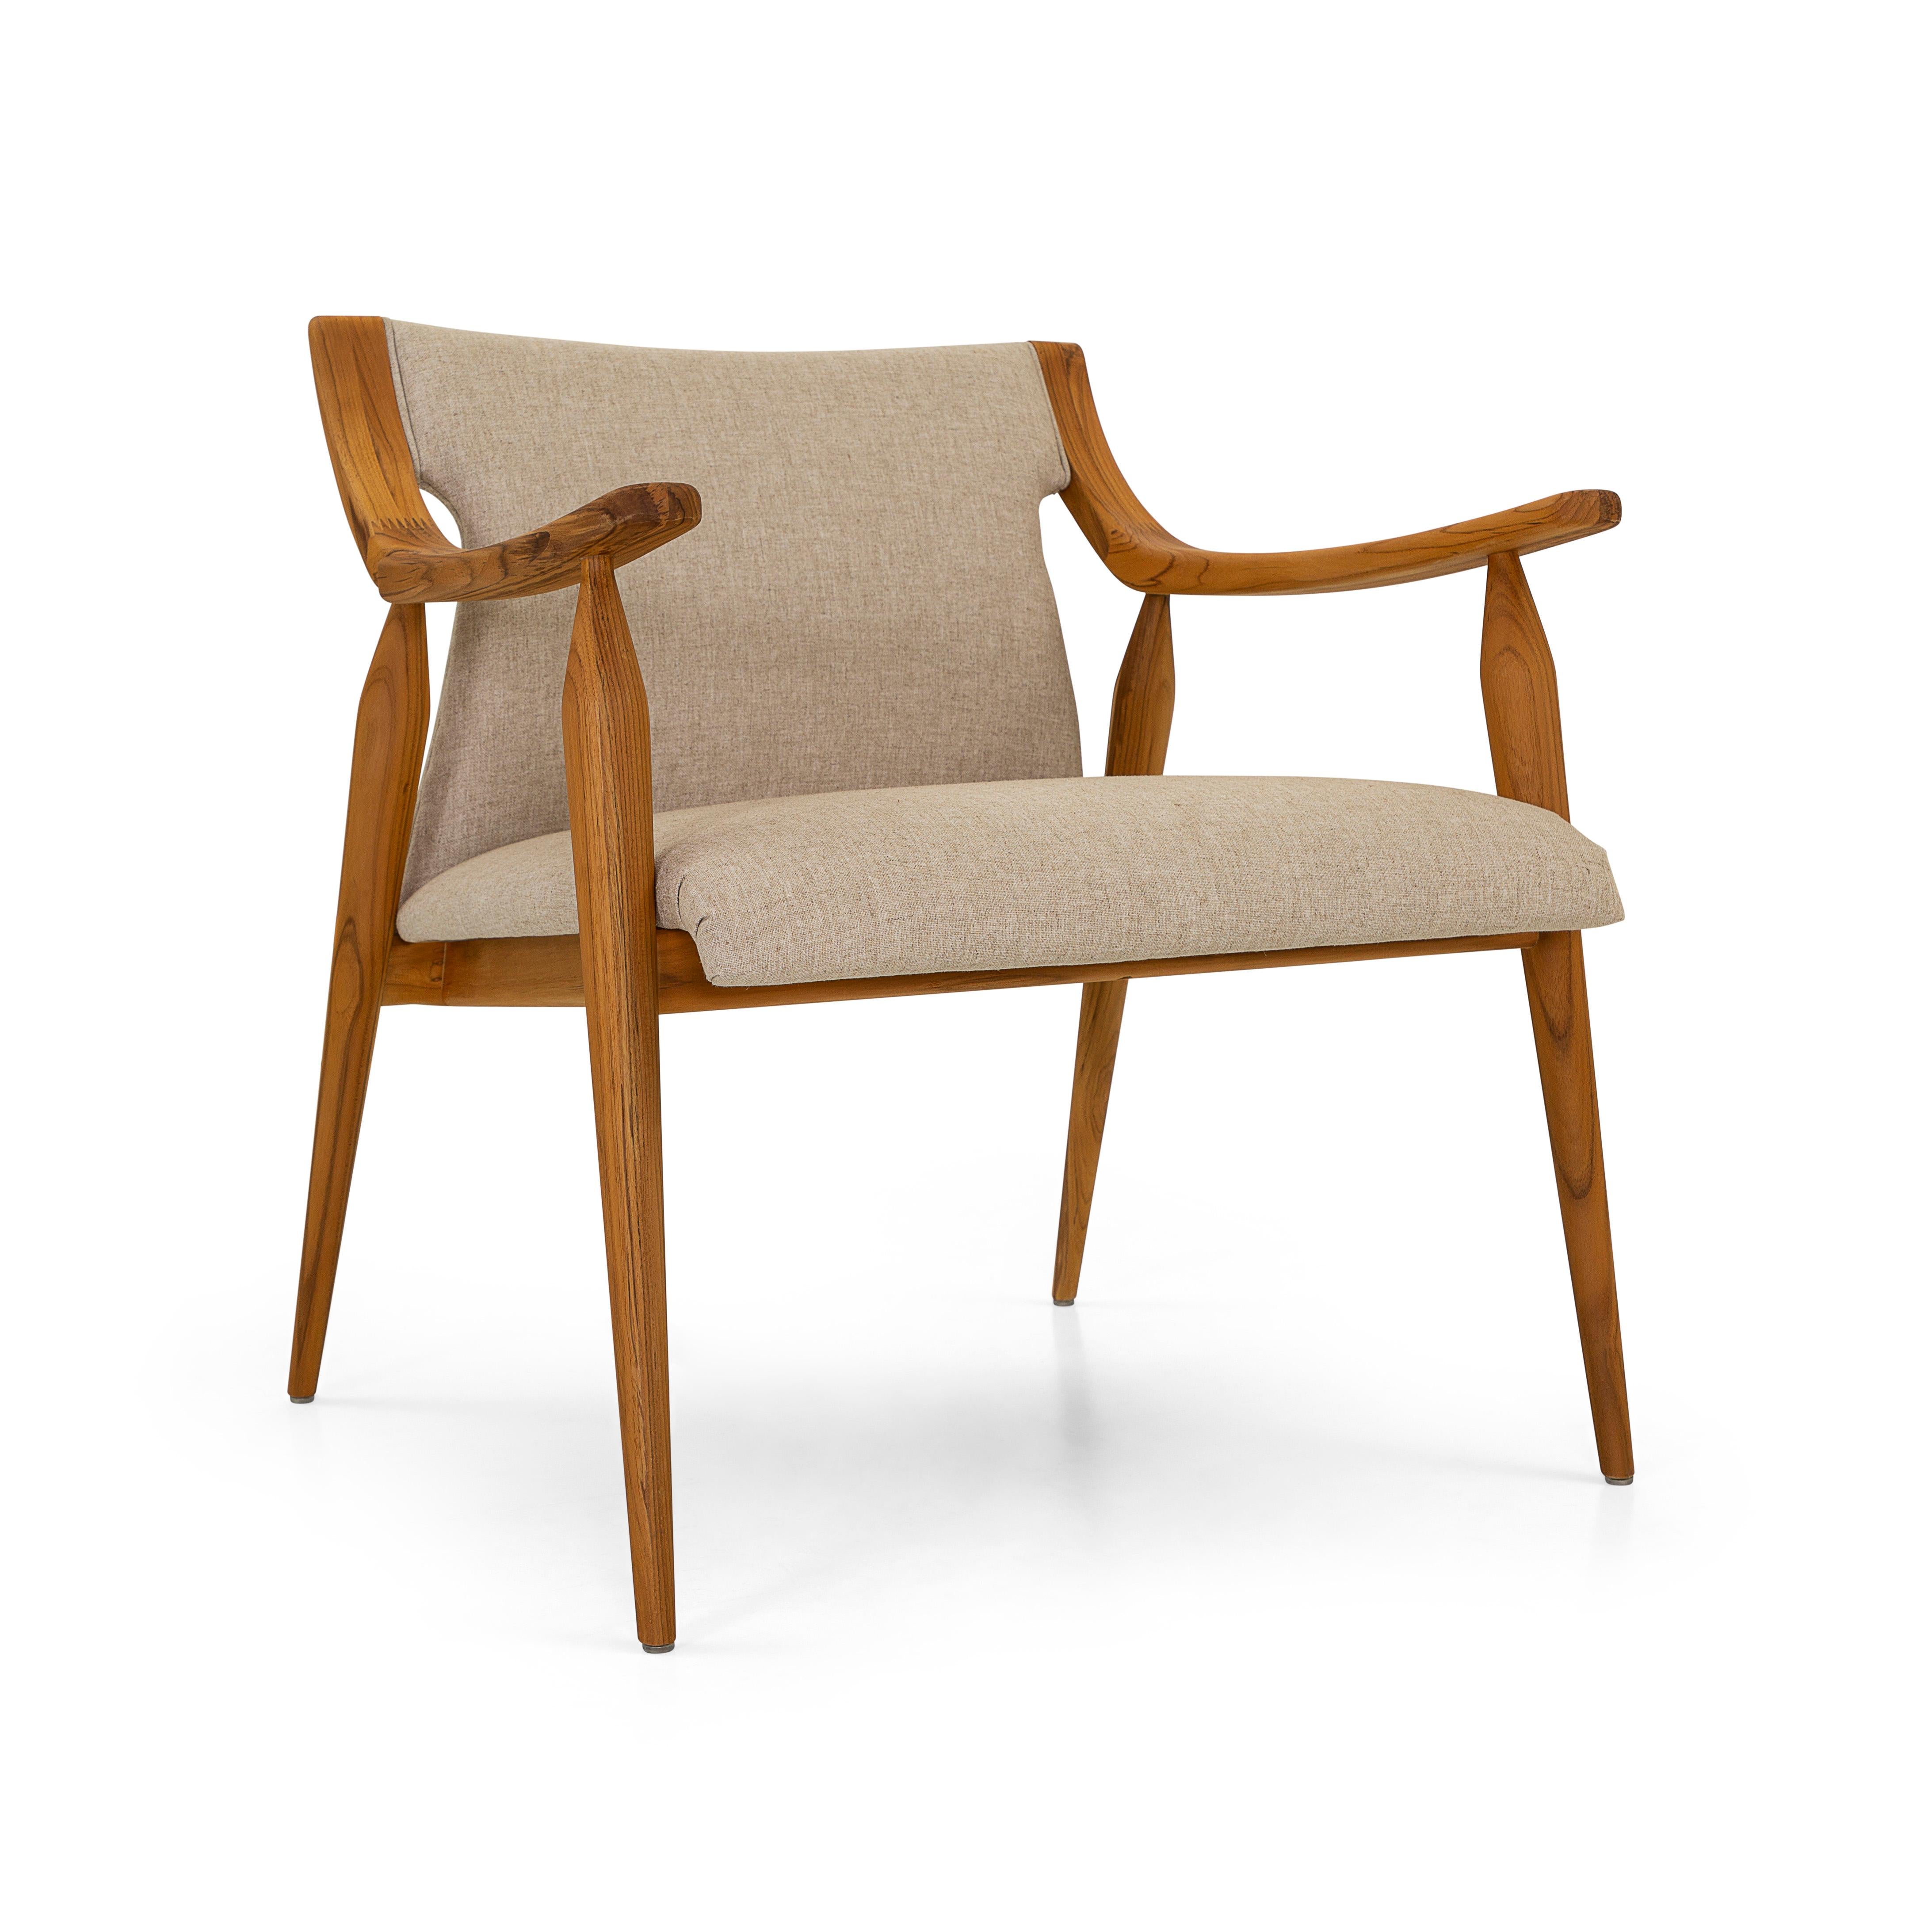 Fabric Mince Armchair Featuring Curved Arms and Spindle Legs in Teak Wood Finish For Sale